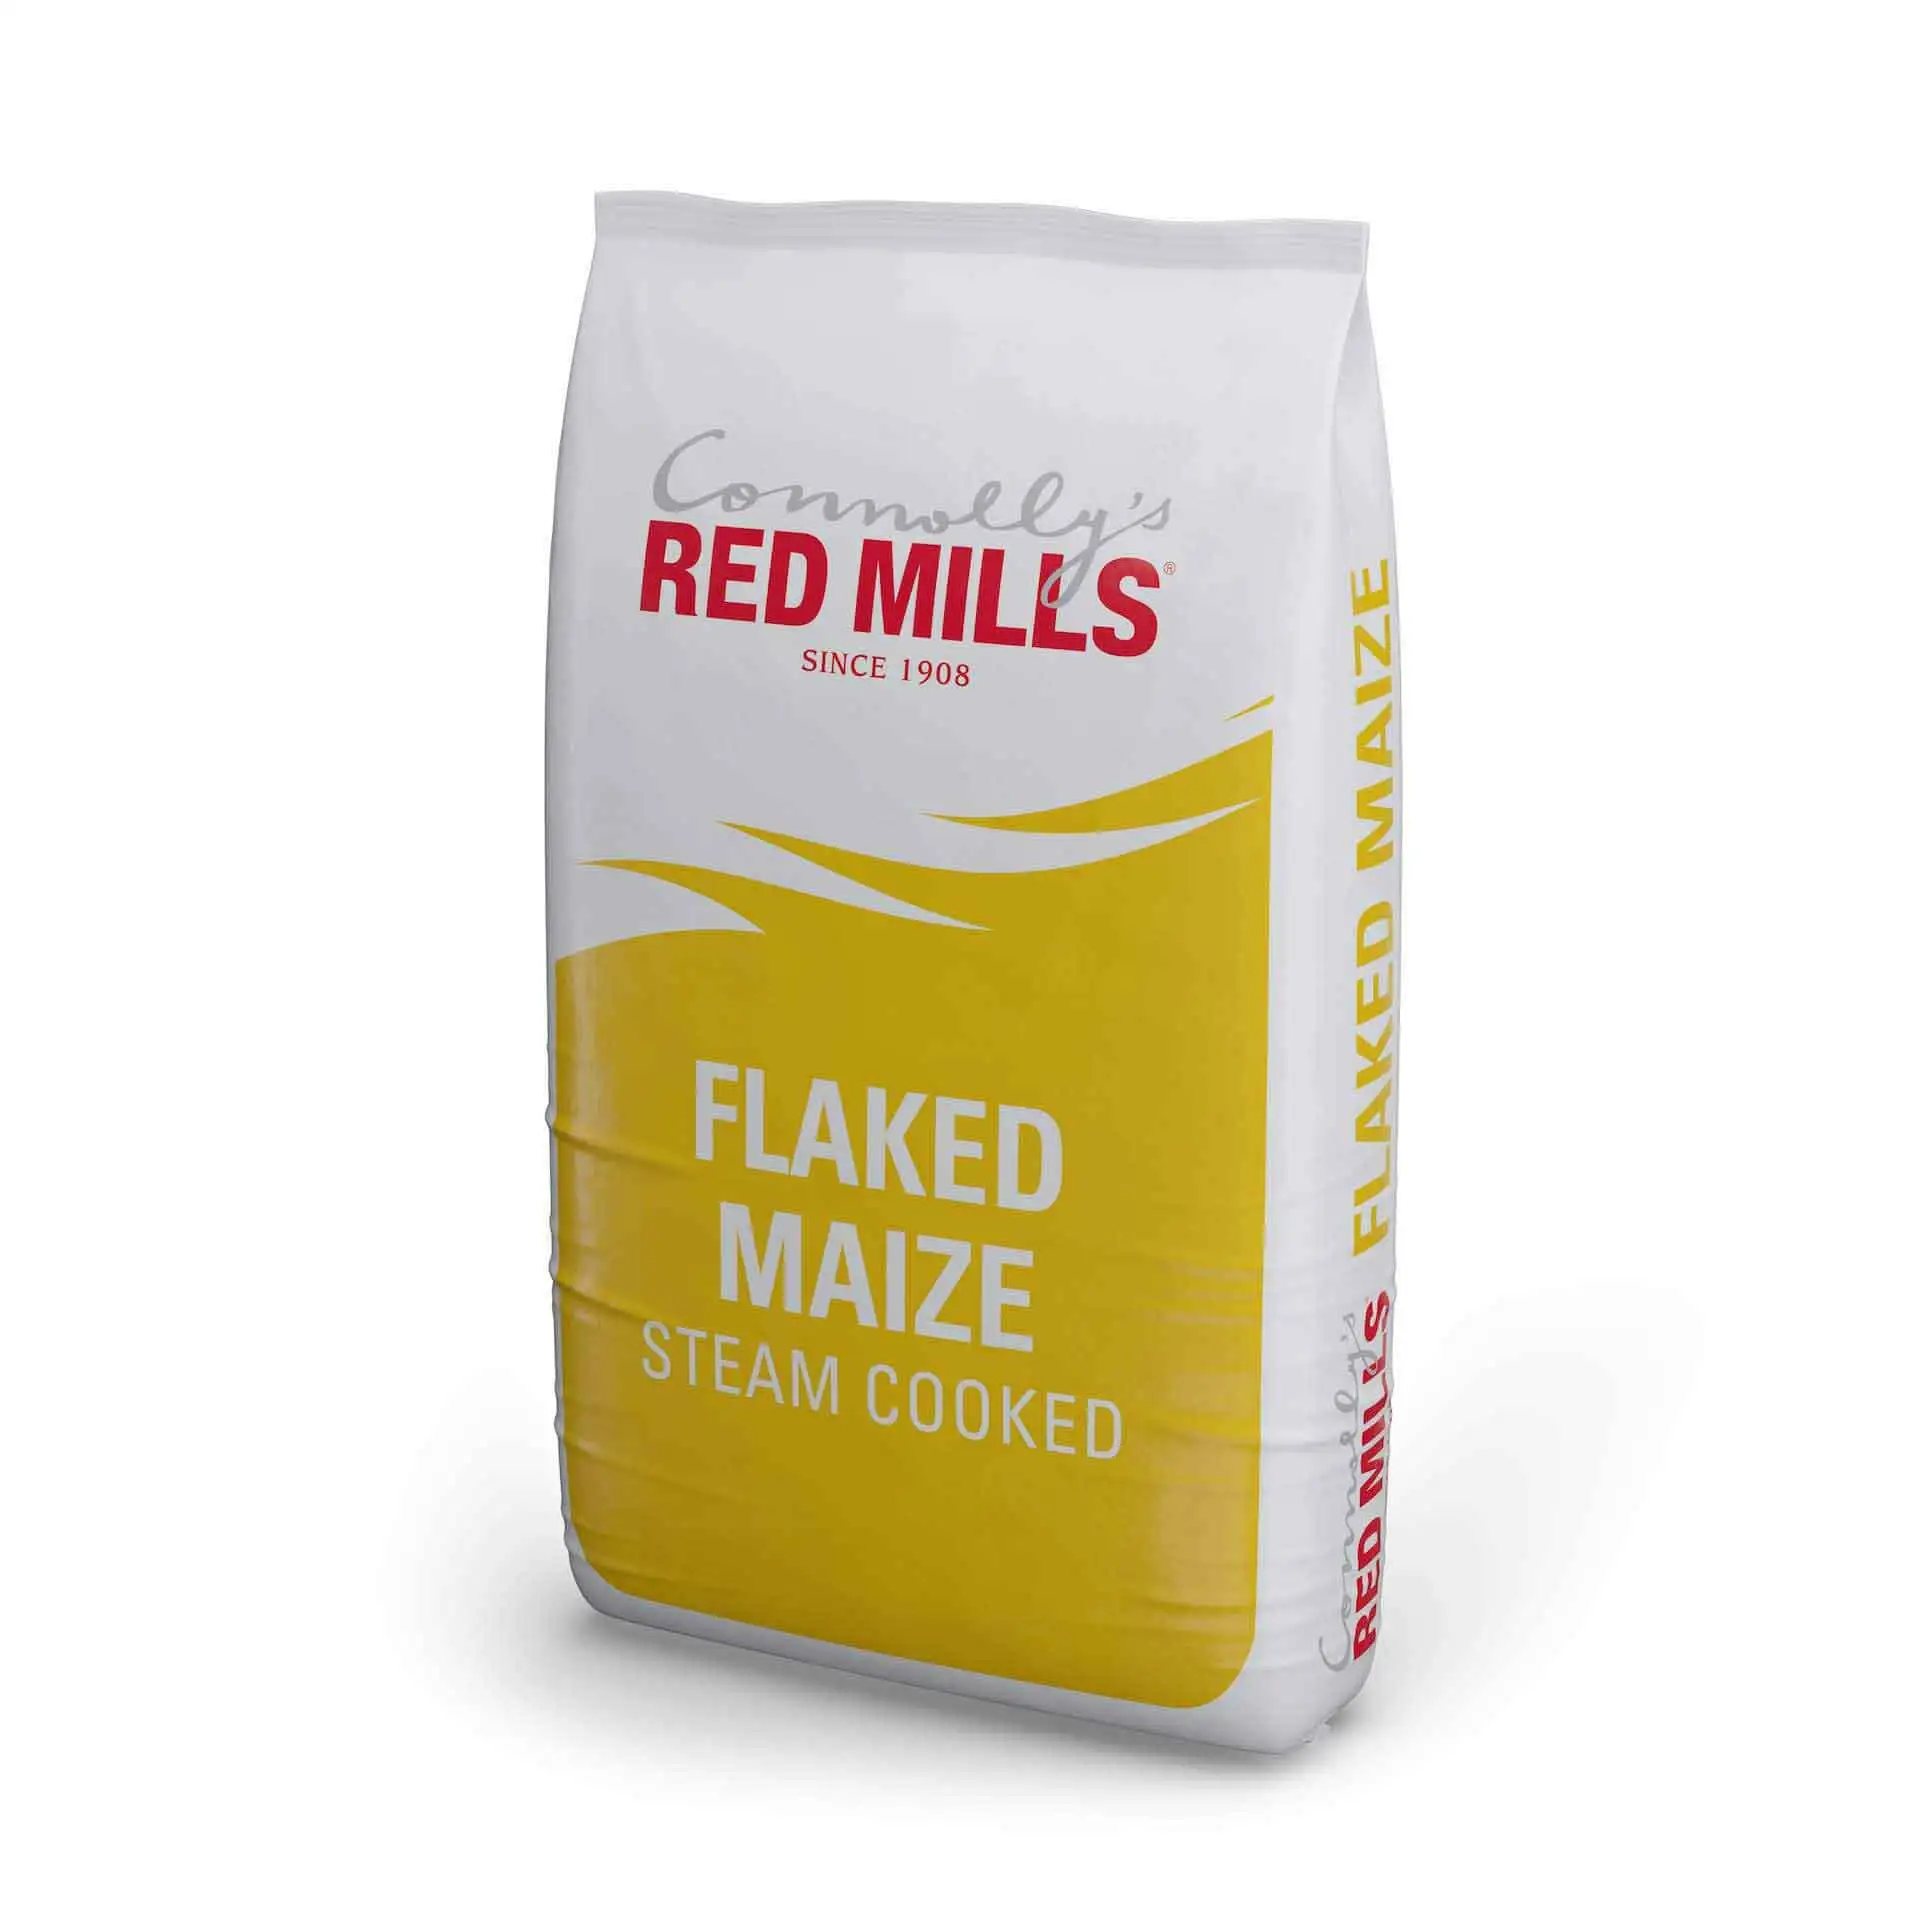 Flaked Maize